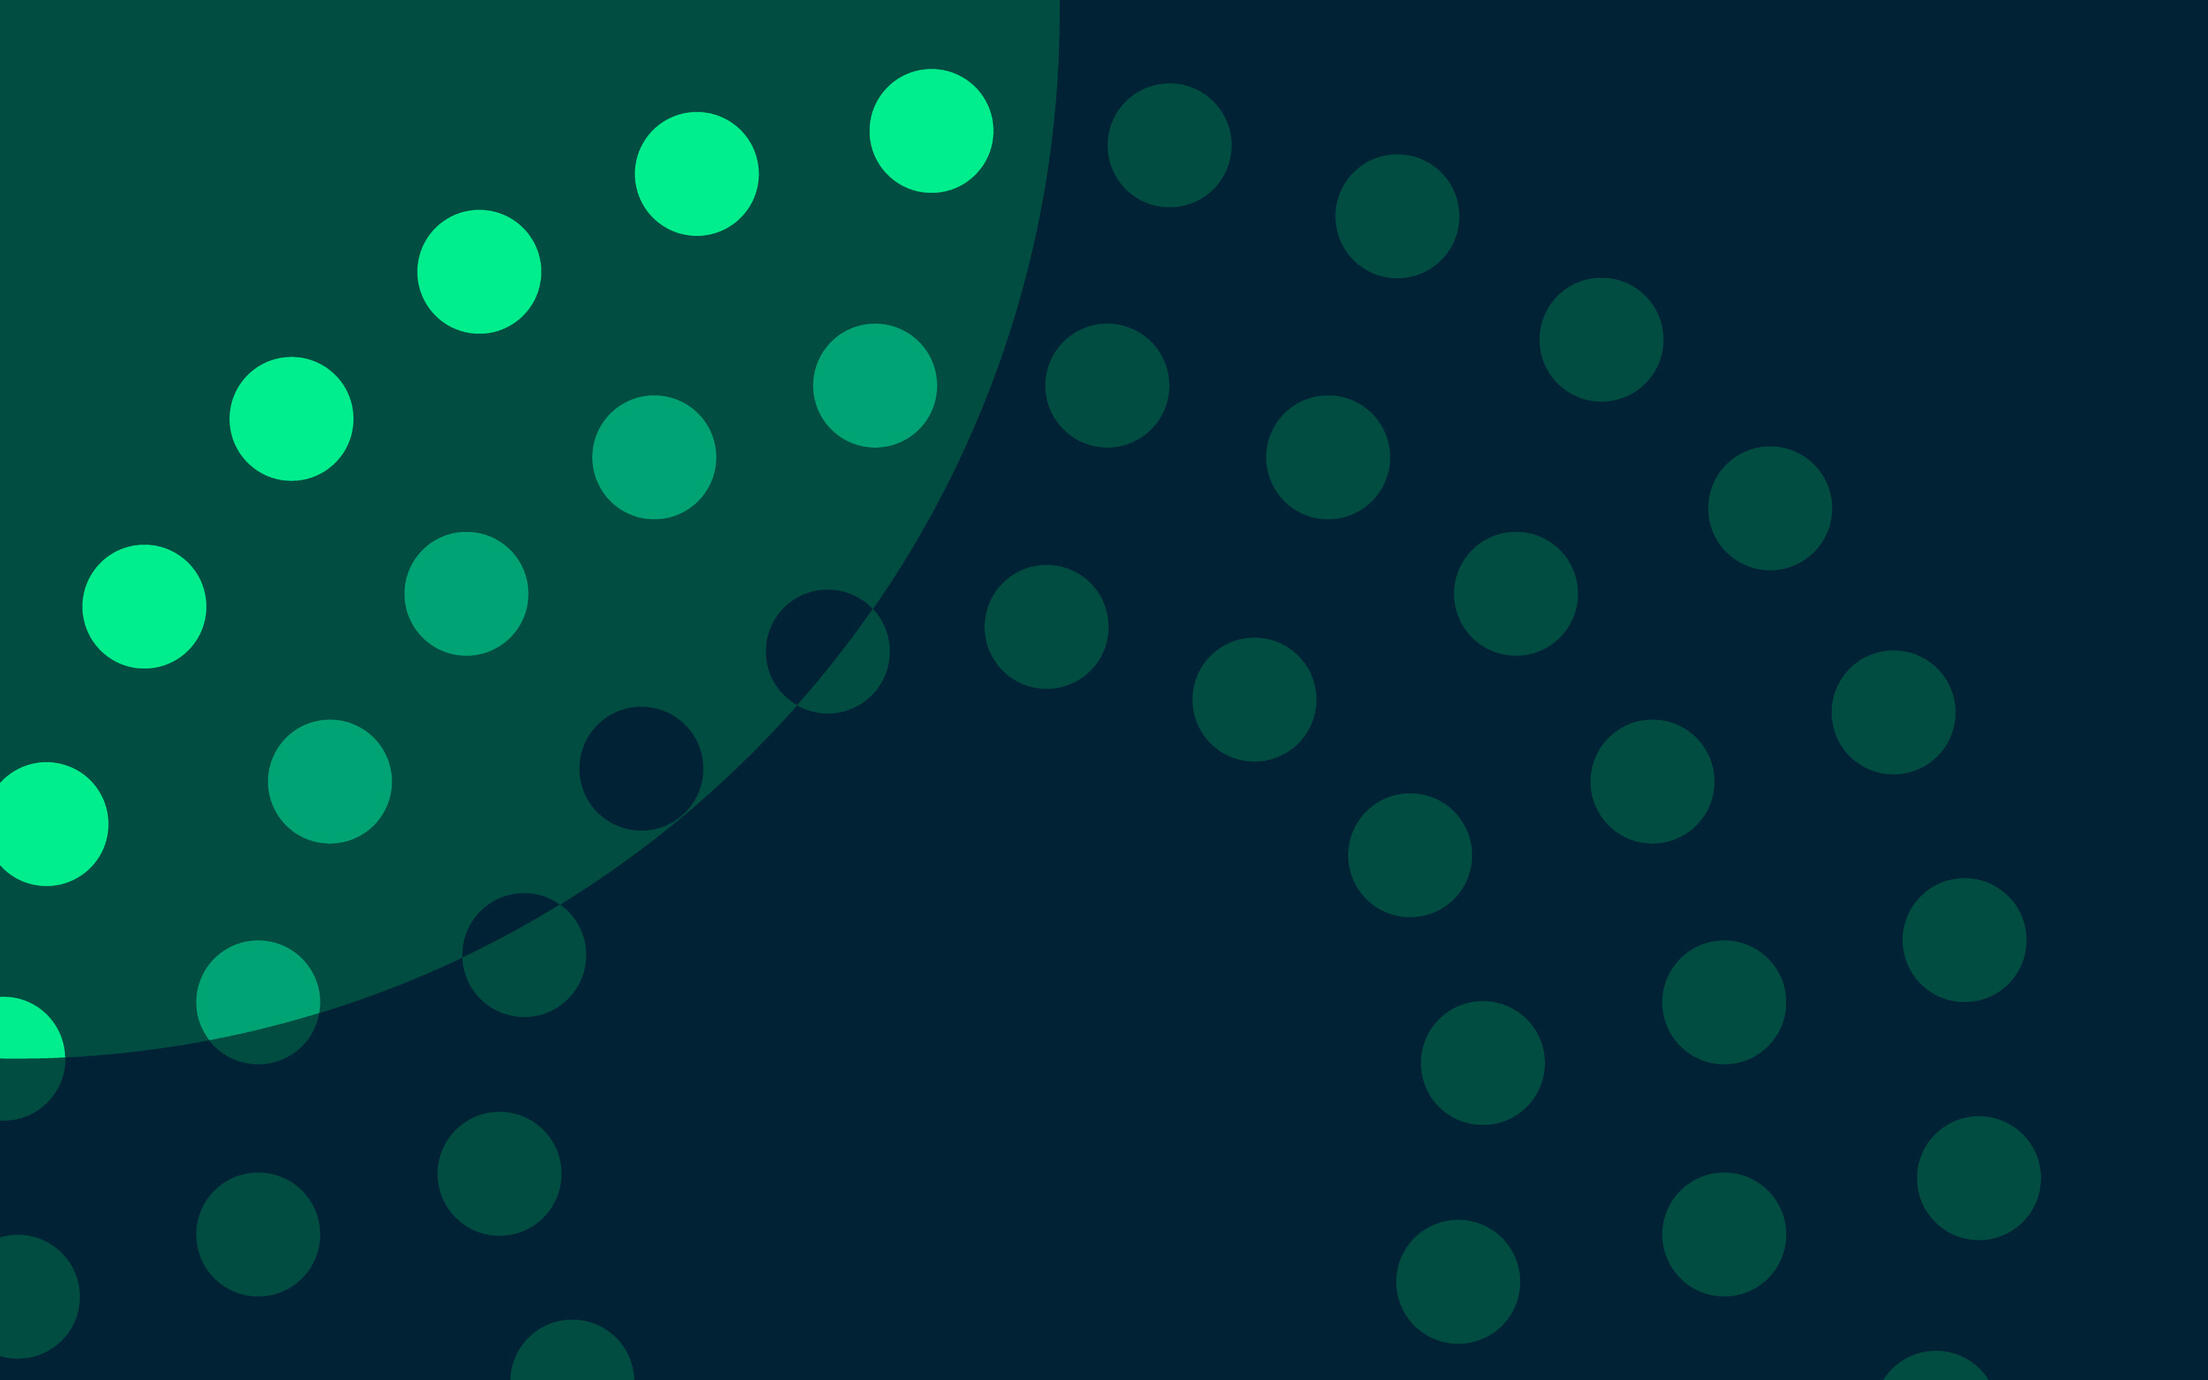 a green pattern of small circles over dark blue background